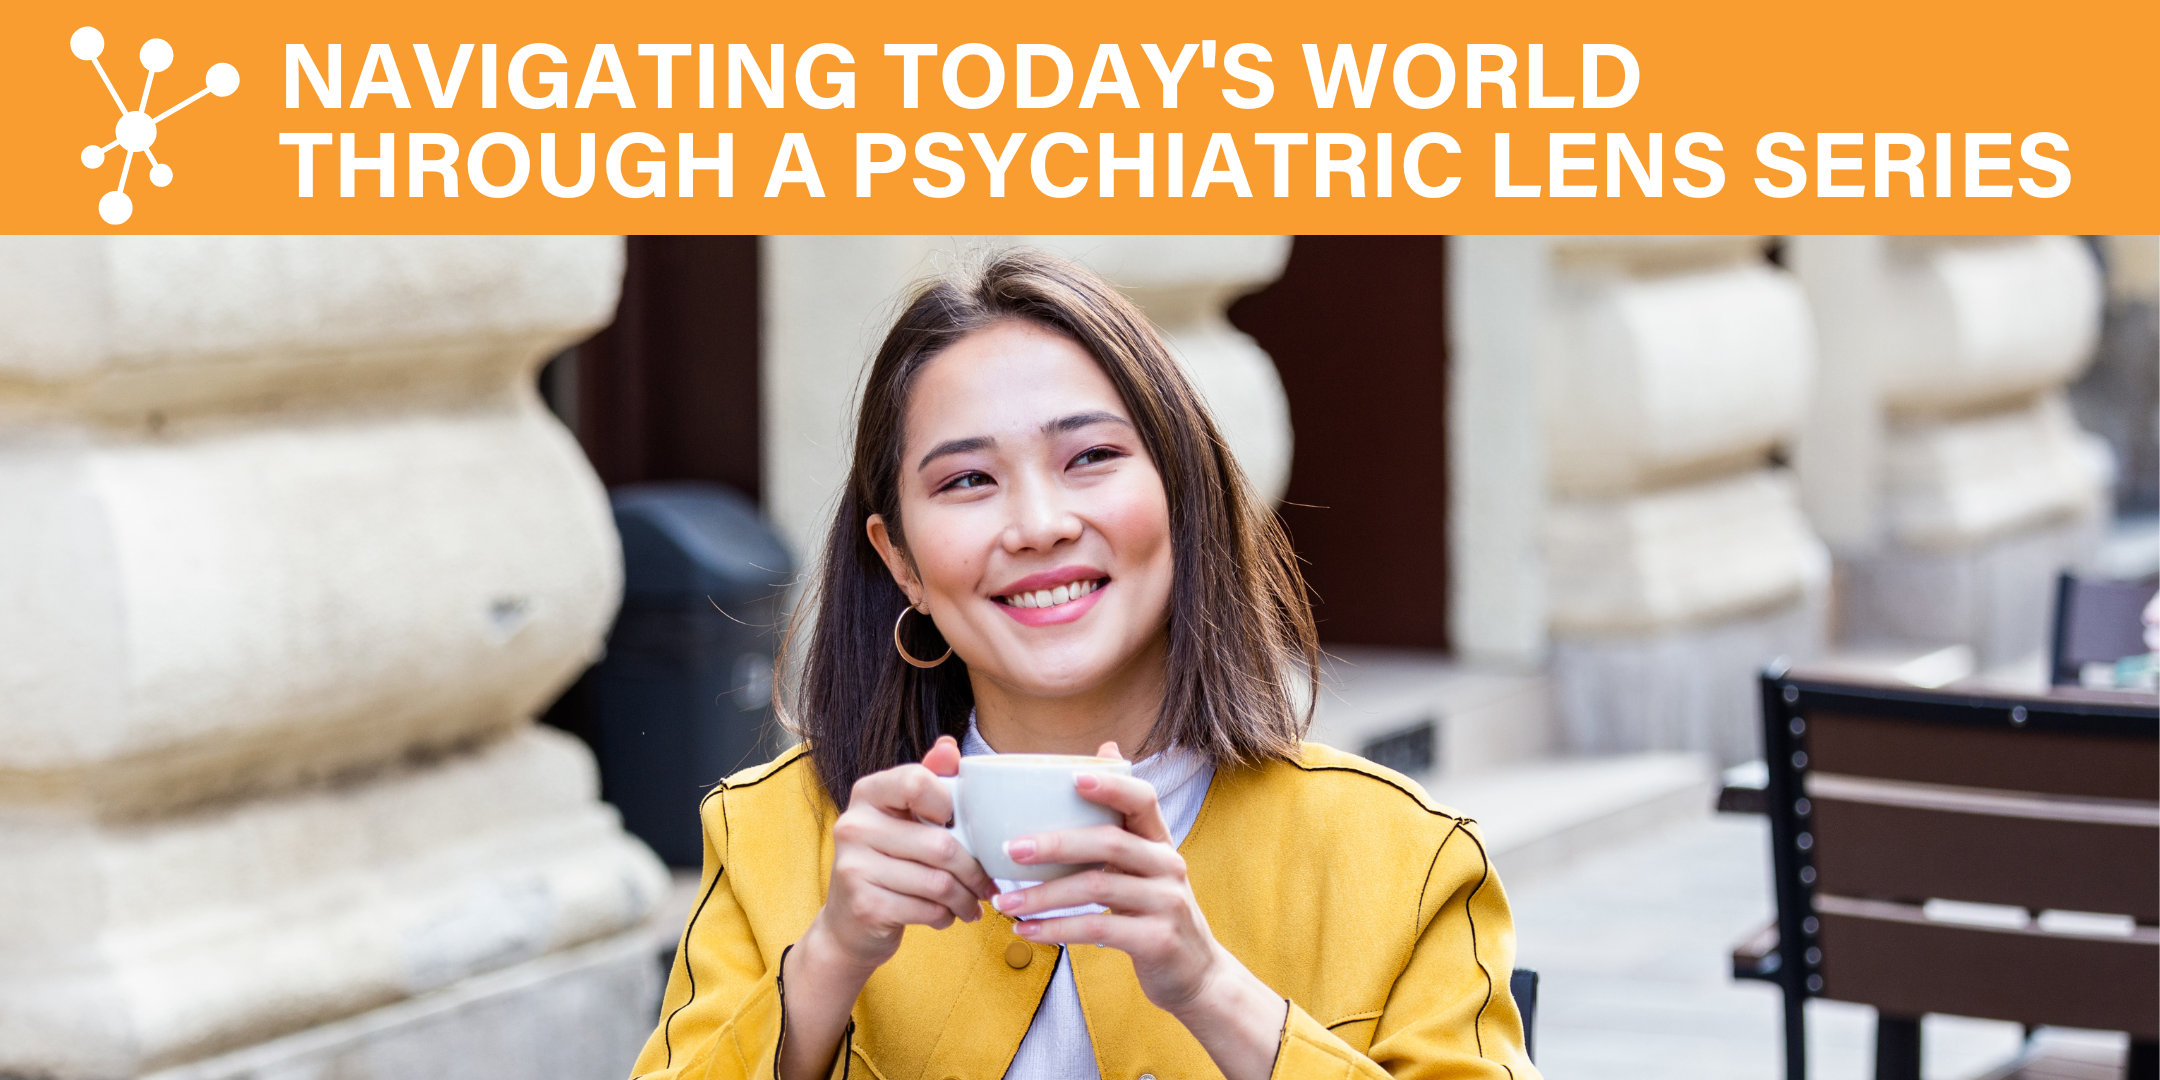 rational use of psychopharmaceuticals in mental health, young, professional woman smiling with a cup of tea, working on a laptop